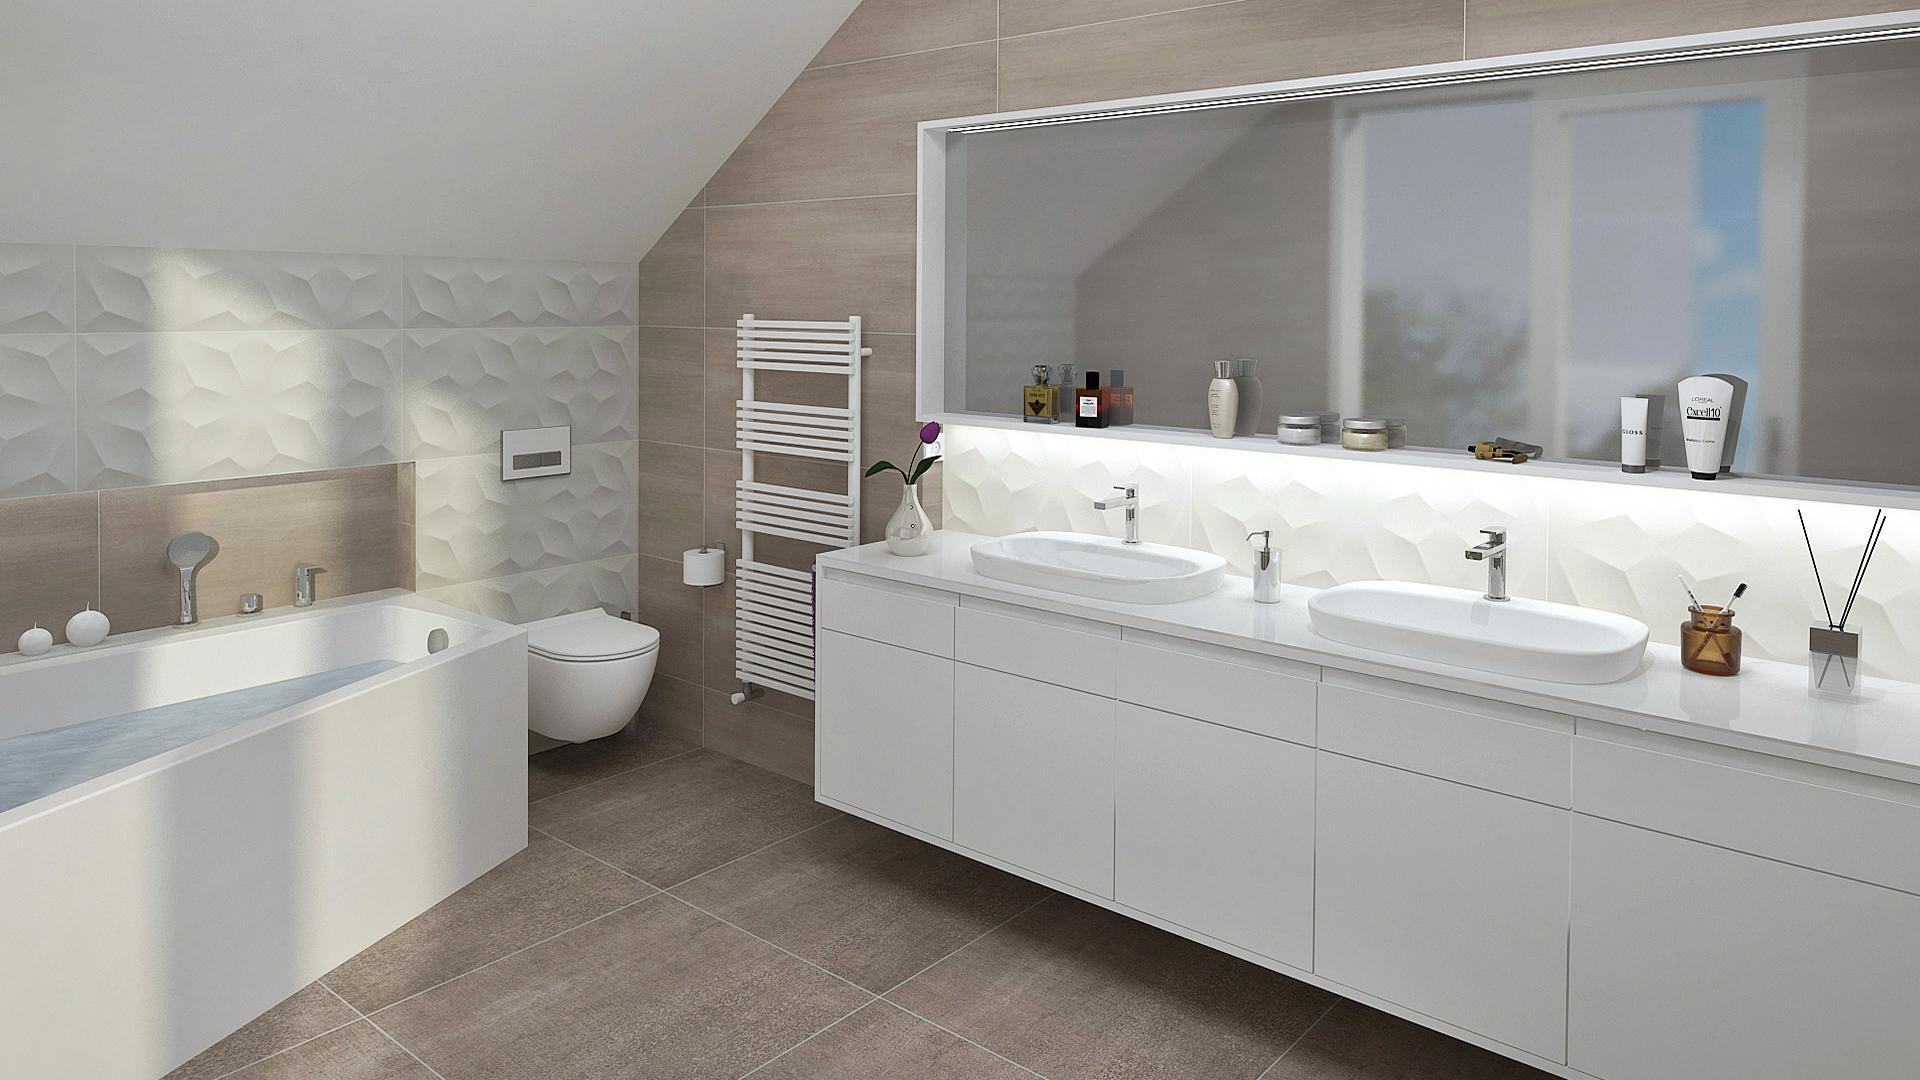 Modern bathroom lined with 3d shaped ceramics in a floral pattern